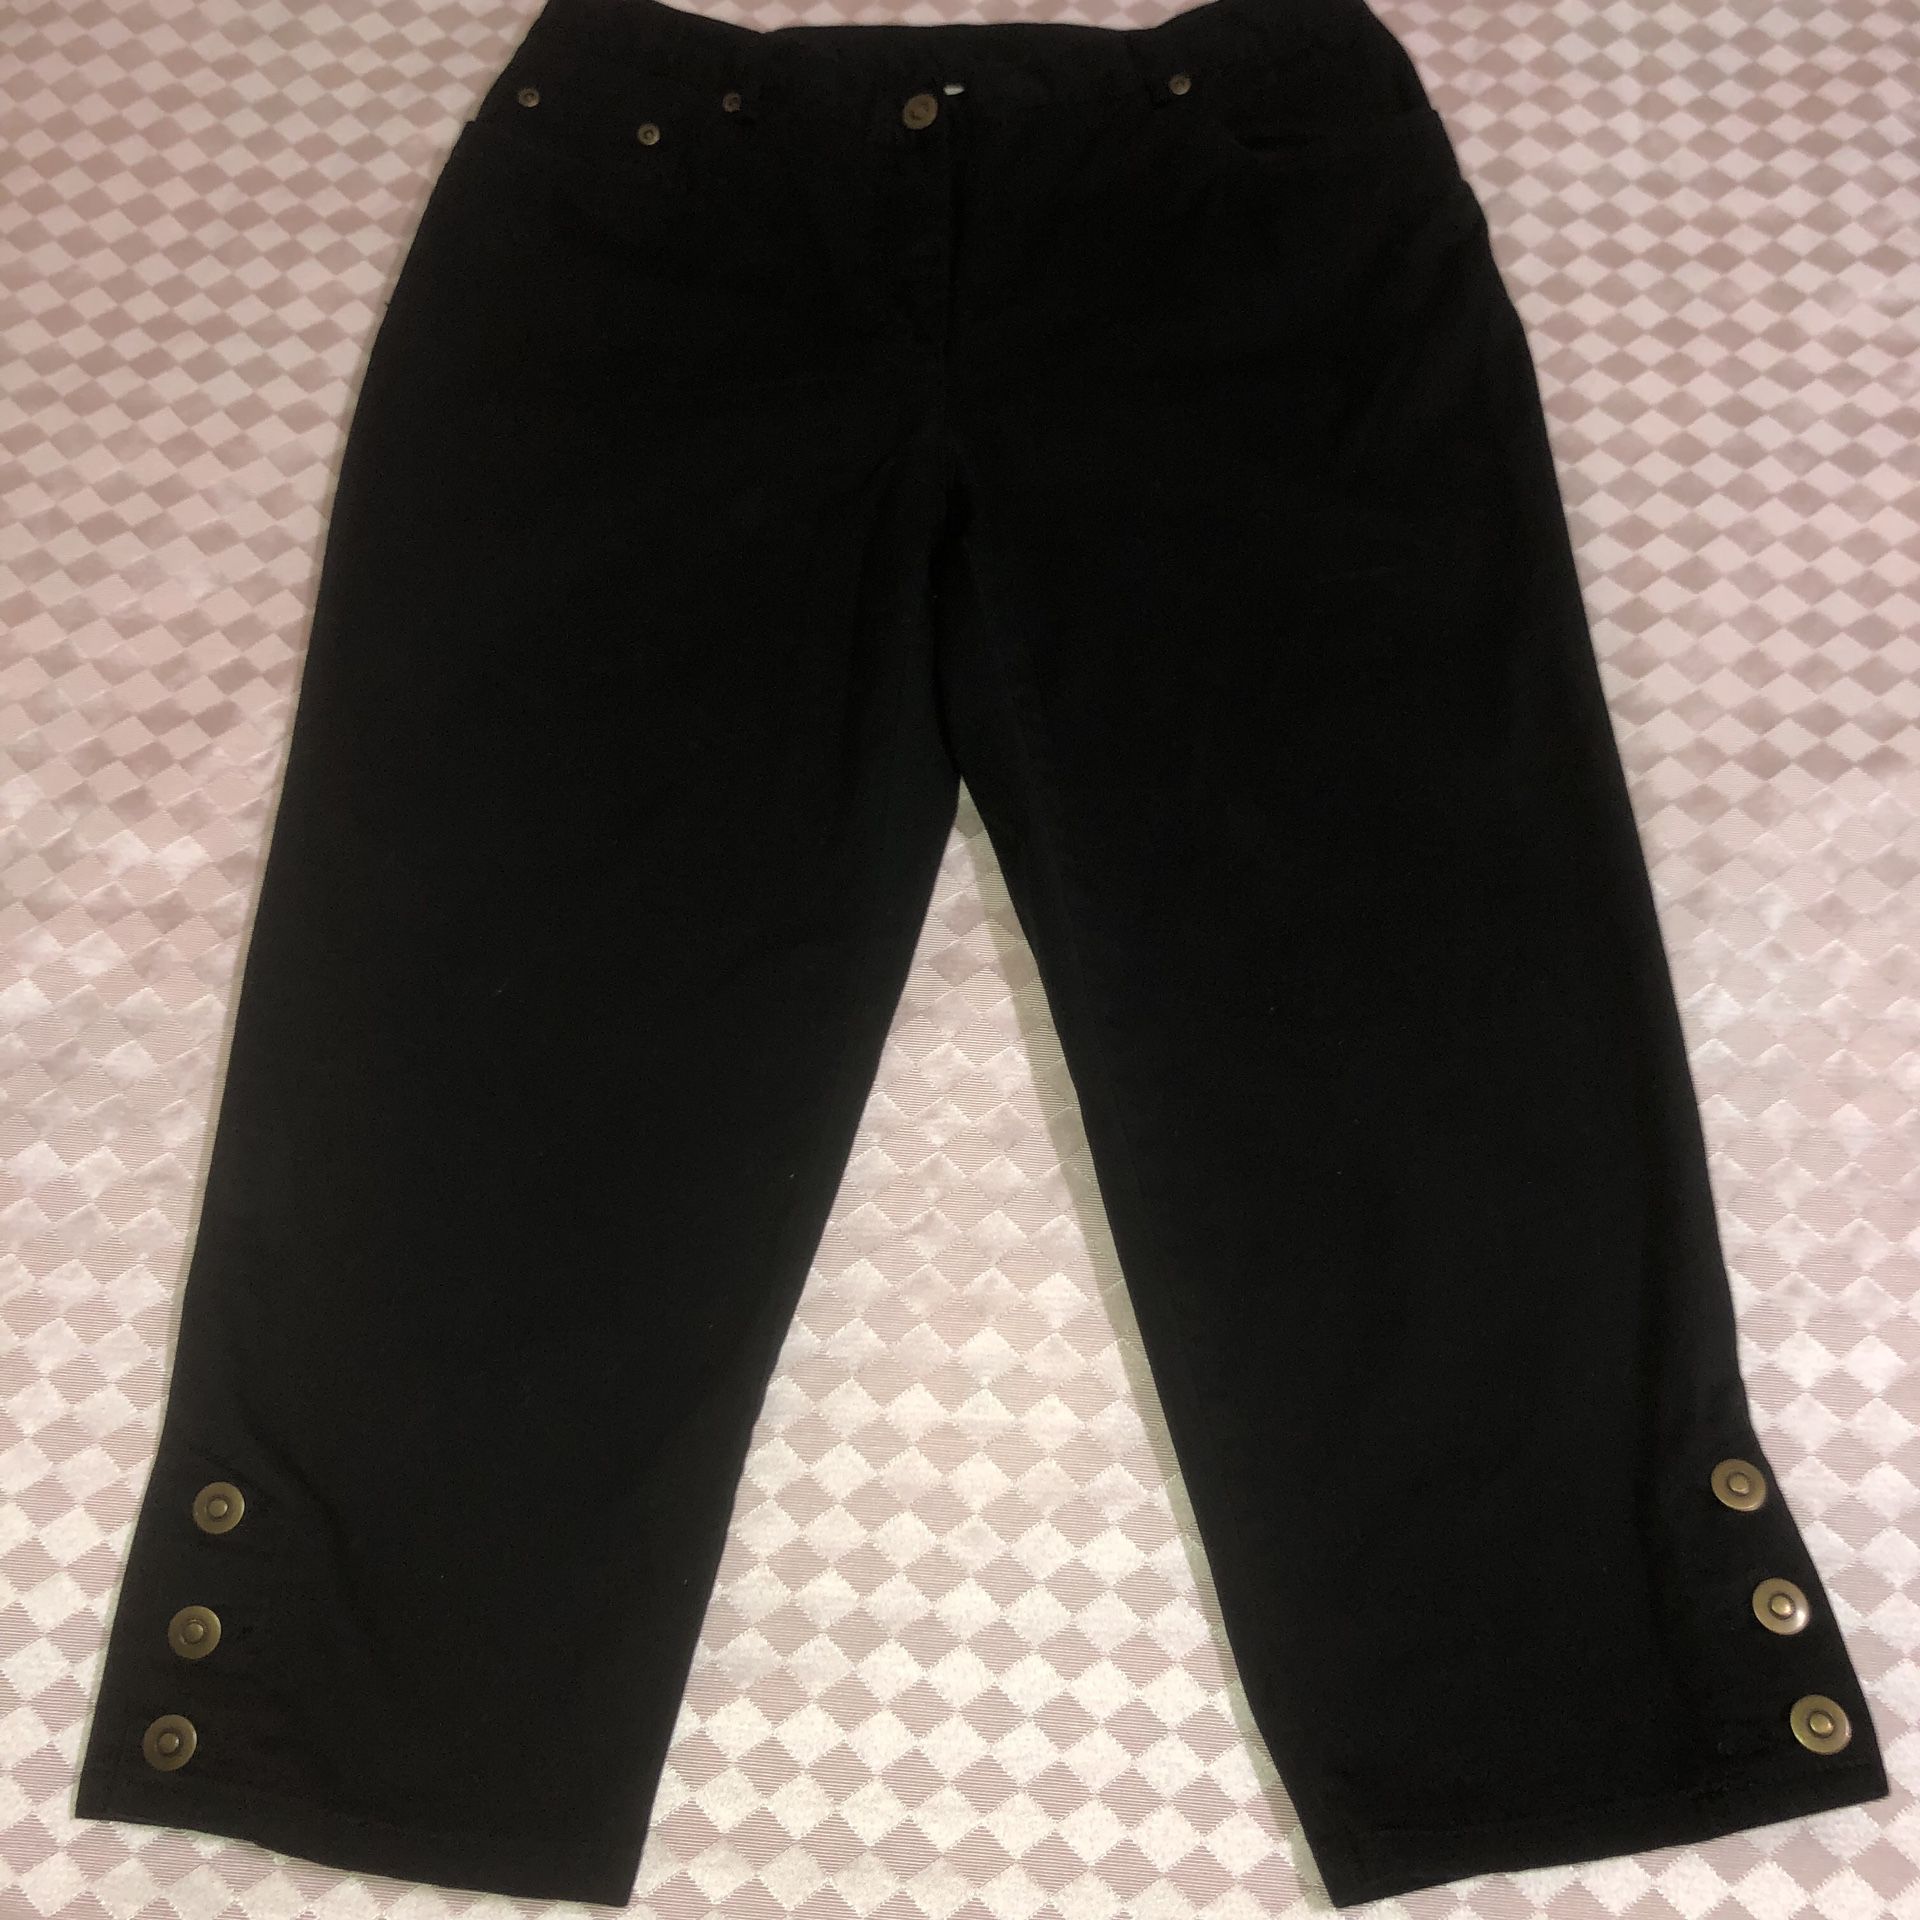 Black cropped pants with elastic in the waist and bronze snaps at the bottom WAIST: 30” INSEAM: 21”